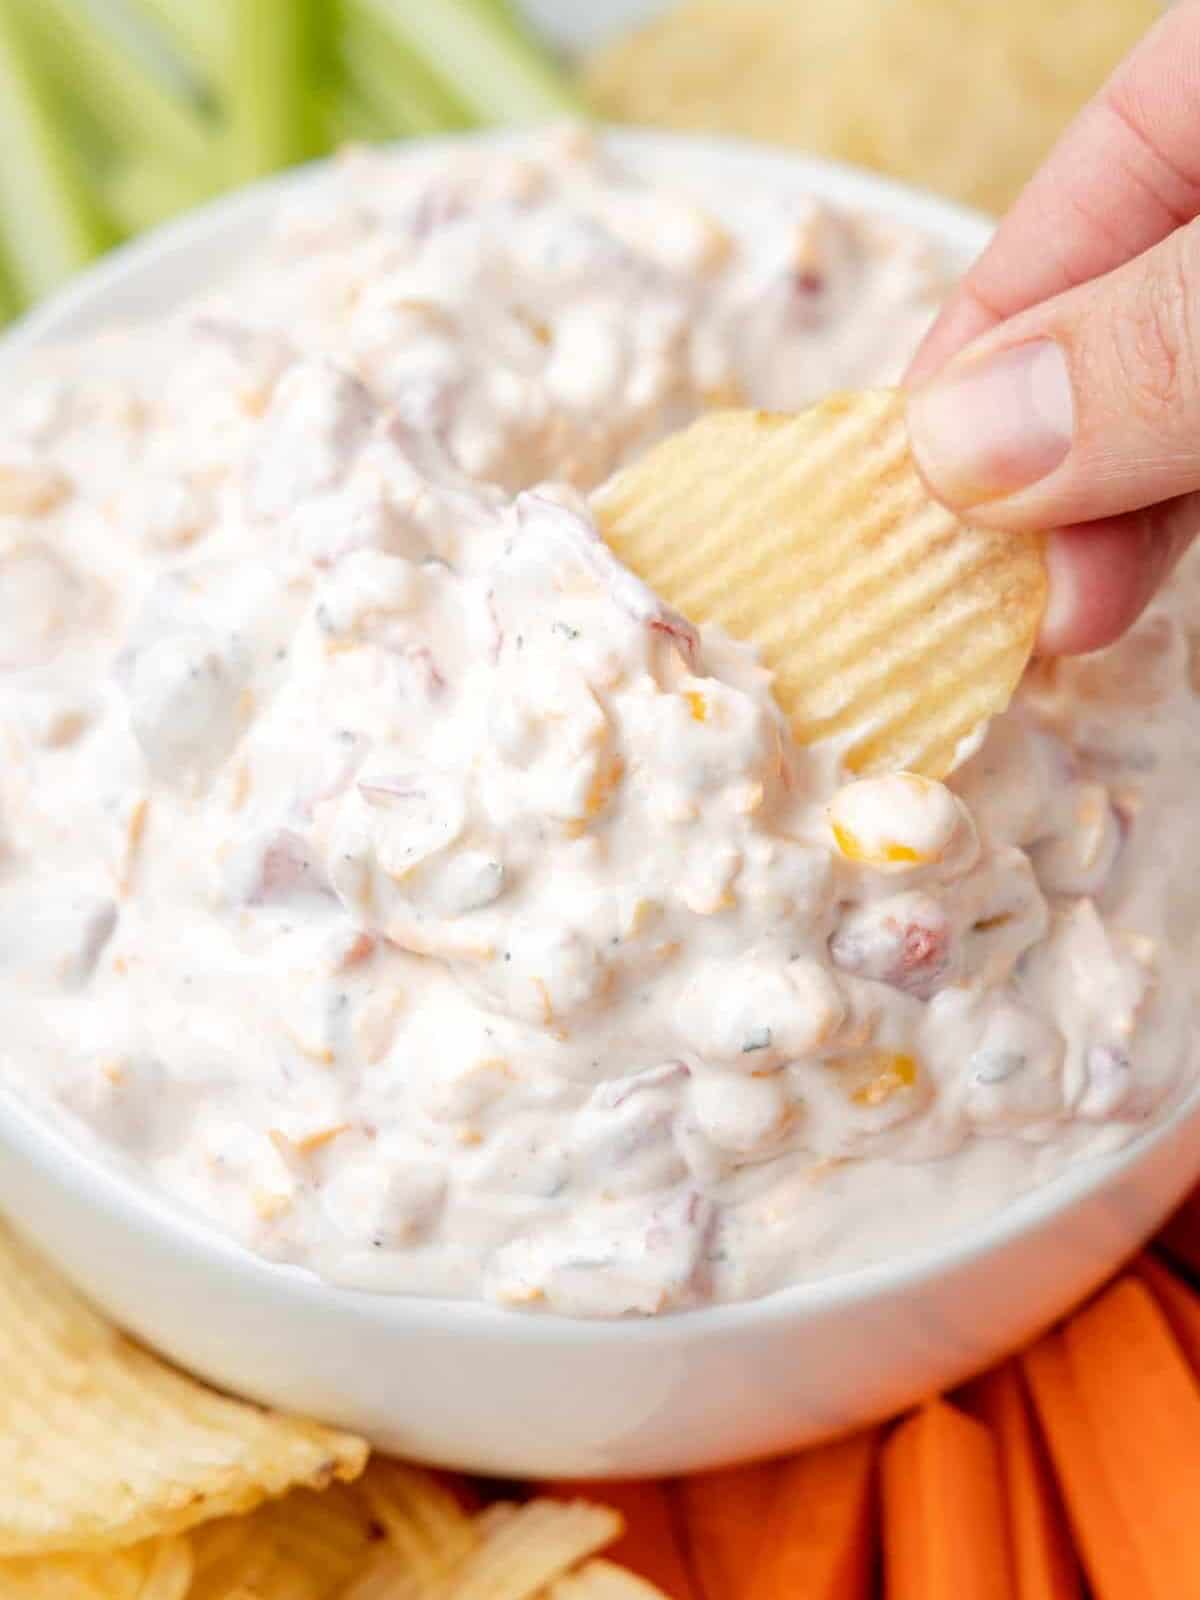 three-quarters view of a hand dipping a wavy potato chip into fiesta ranch dip in a white bowl surrounded by wavy potato chips, carrot sticks, tortilla chips, and celery sticks.